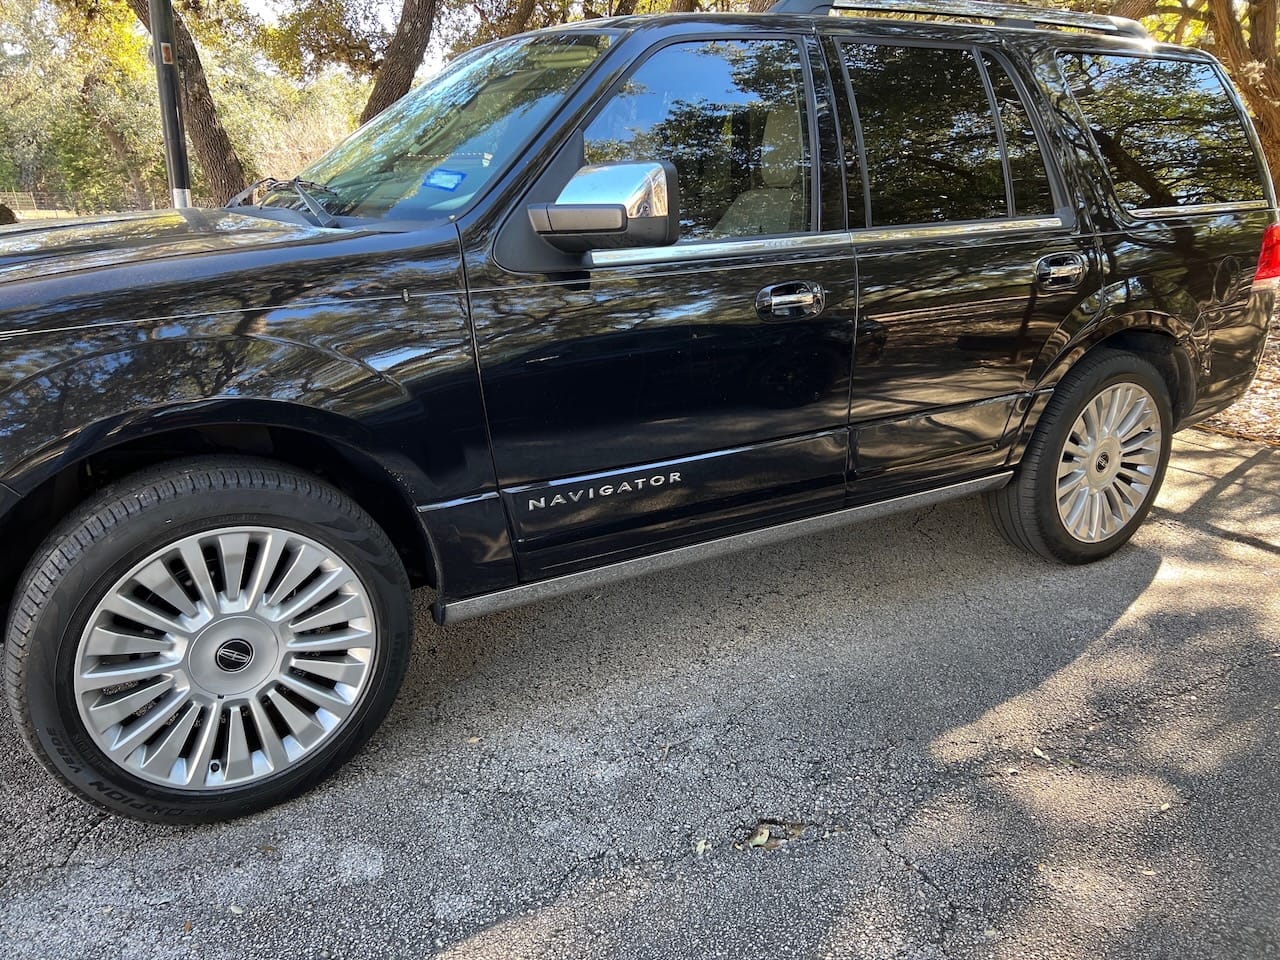 Here is a wide angle shot of the alloy wheels freshly painted on our Lincoln Navigator. Looks clean!